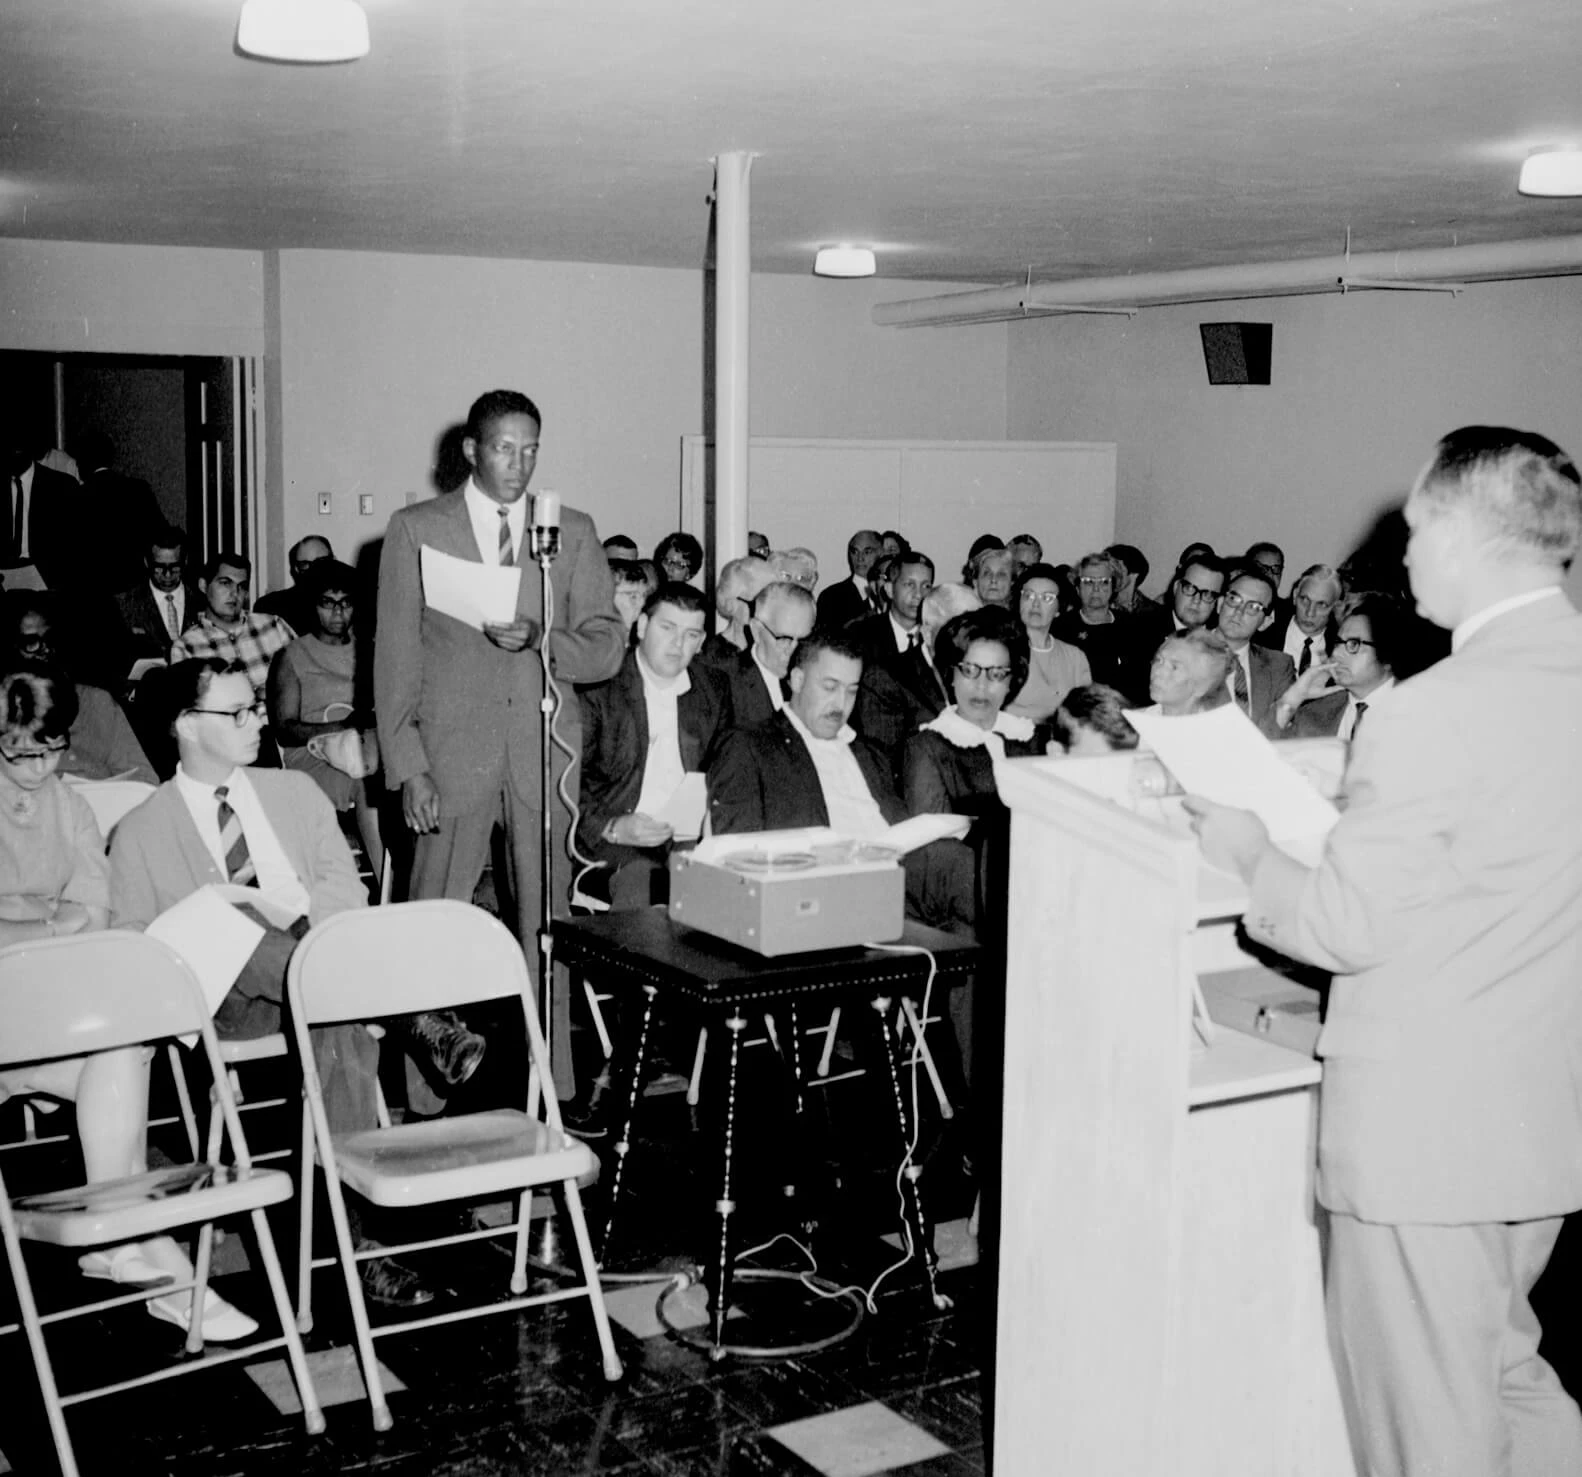 A tall, slim Black man in a suit with a striped tie is speaking at a town meeting. There are dozens of people seated in chairs.